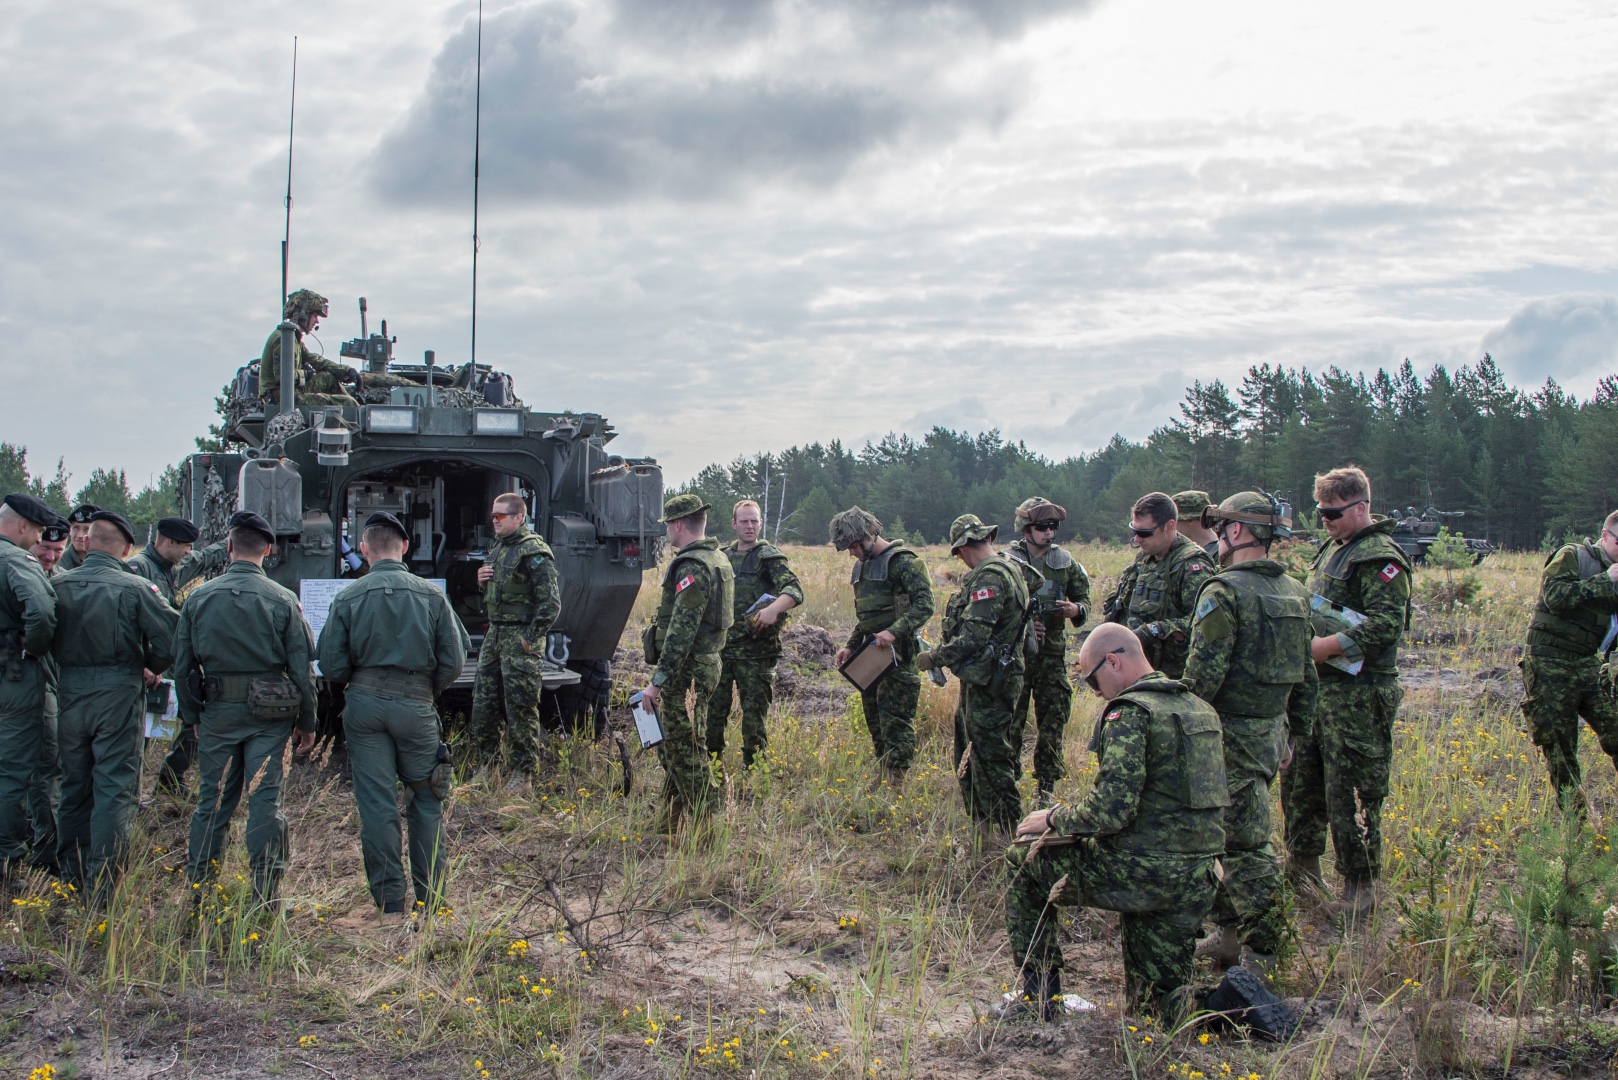 Canadian troops train in Poland